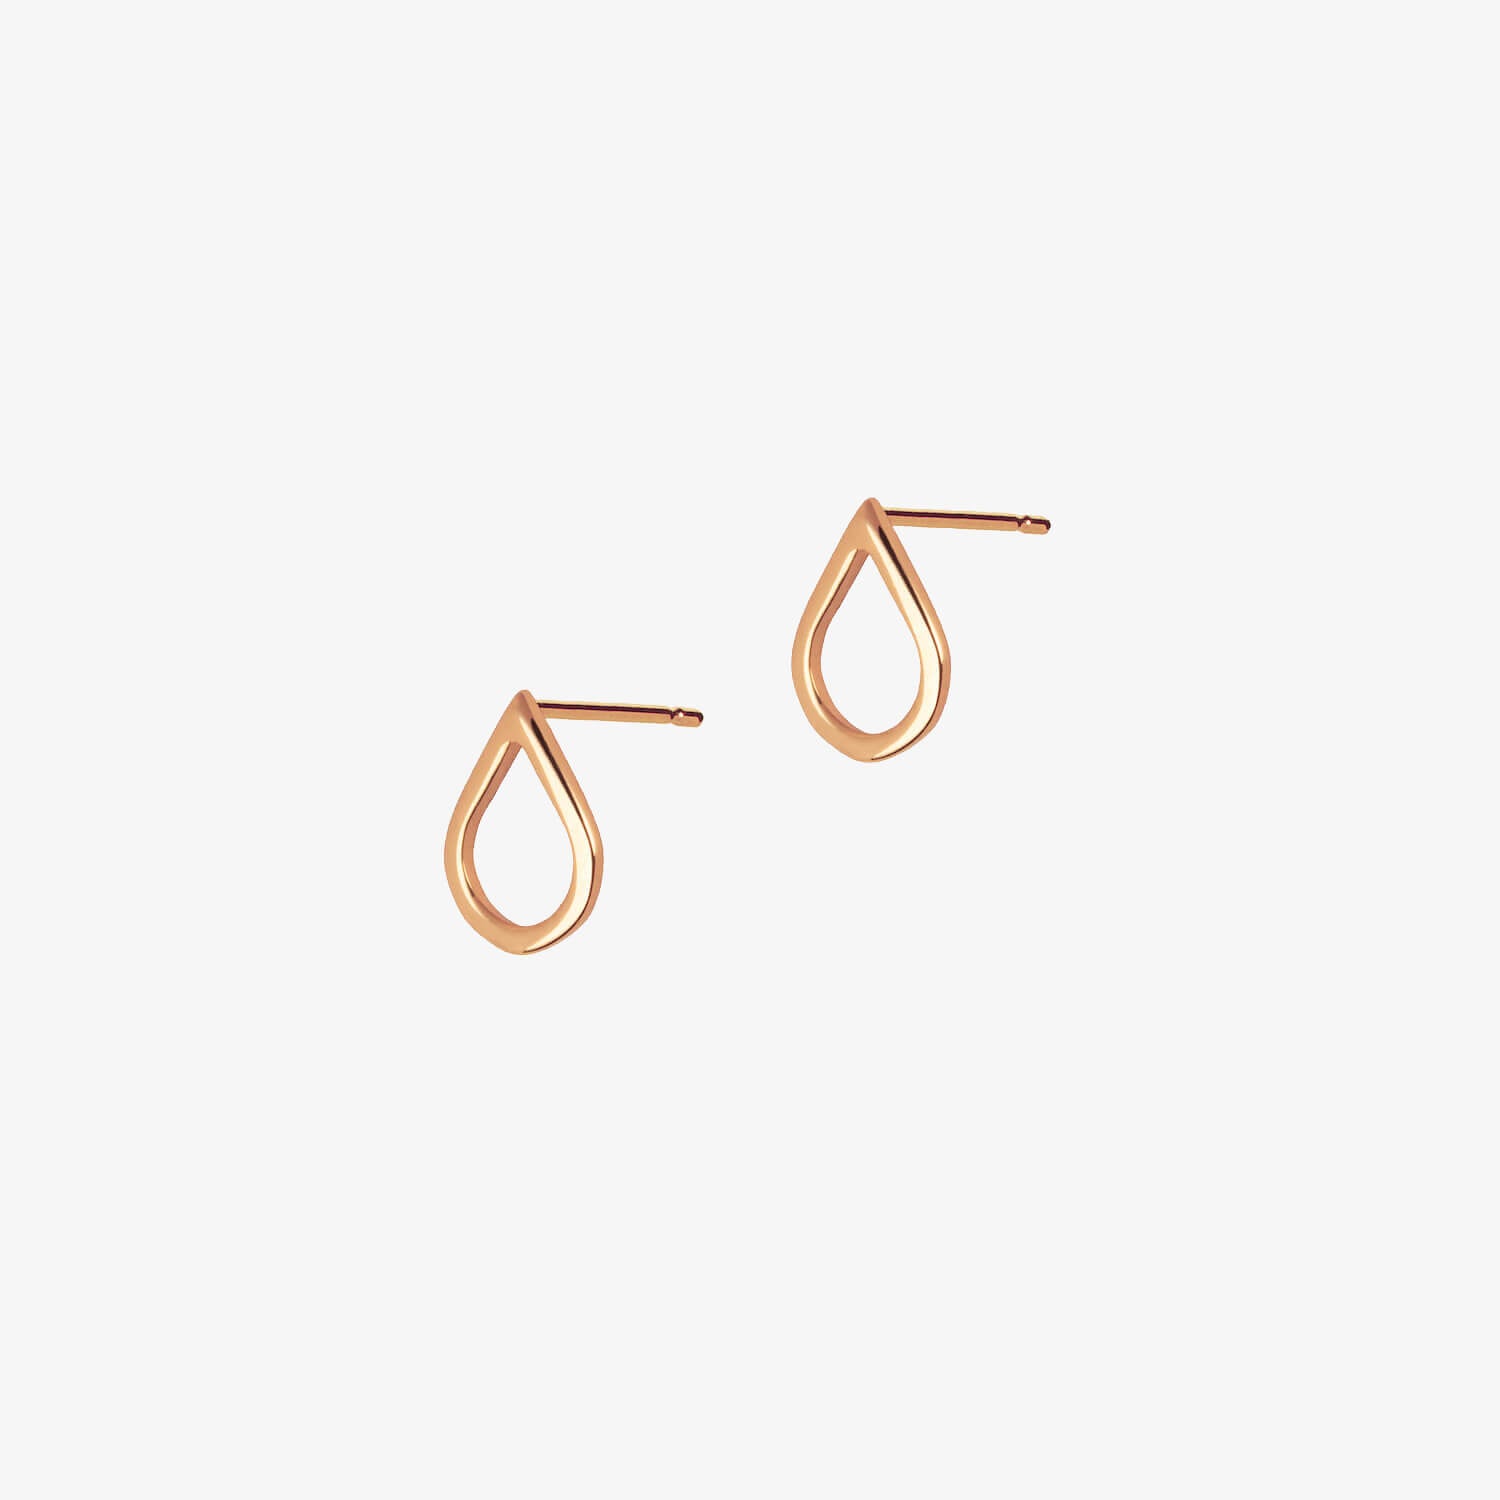 Rose gold teardrop shaped earrings on a white background